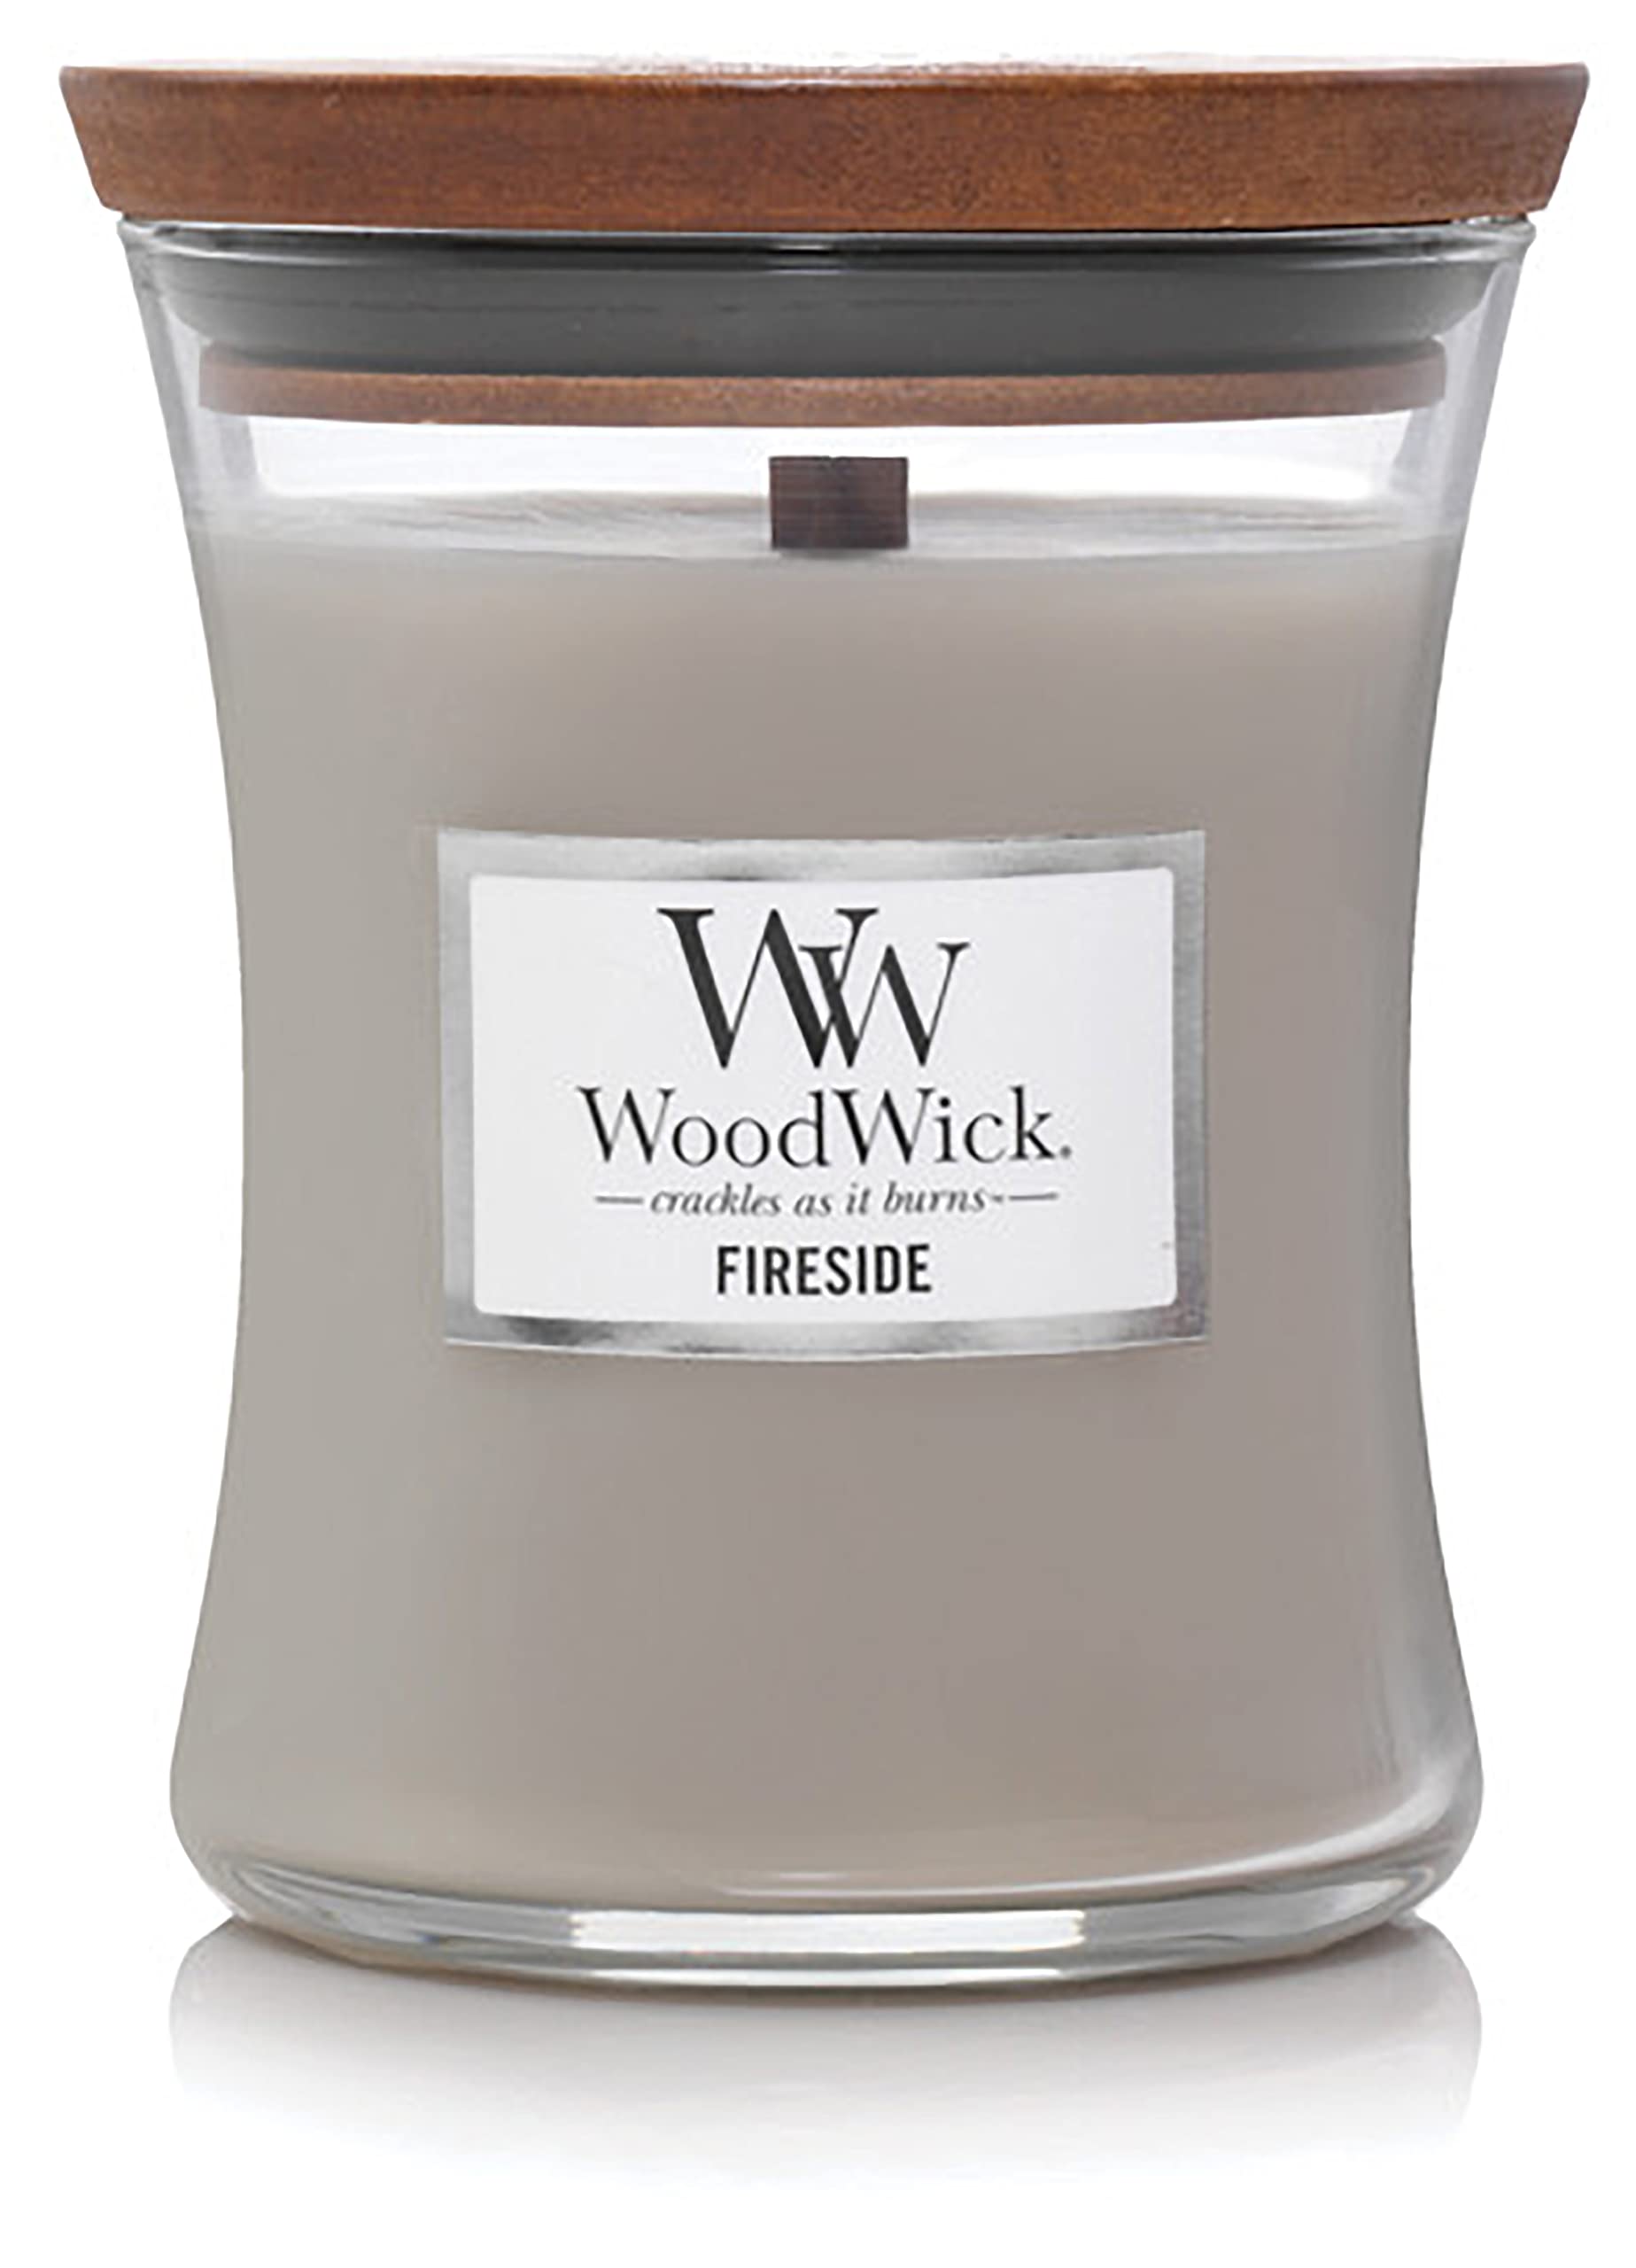 WoodWick Medium Hourglass Candle, Fireside - Premium Soy Blend Wax, Pluswick Innovation Wood Wick, Made in USA